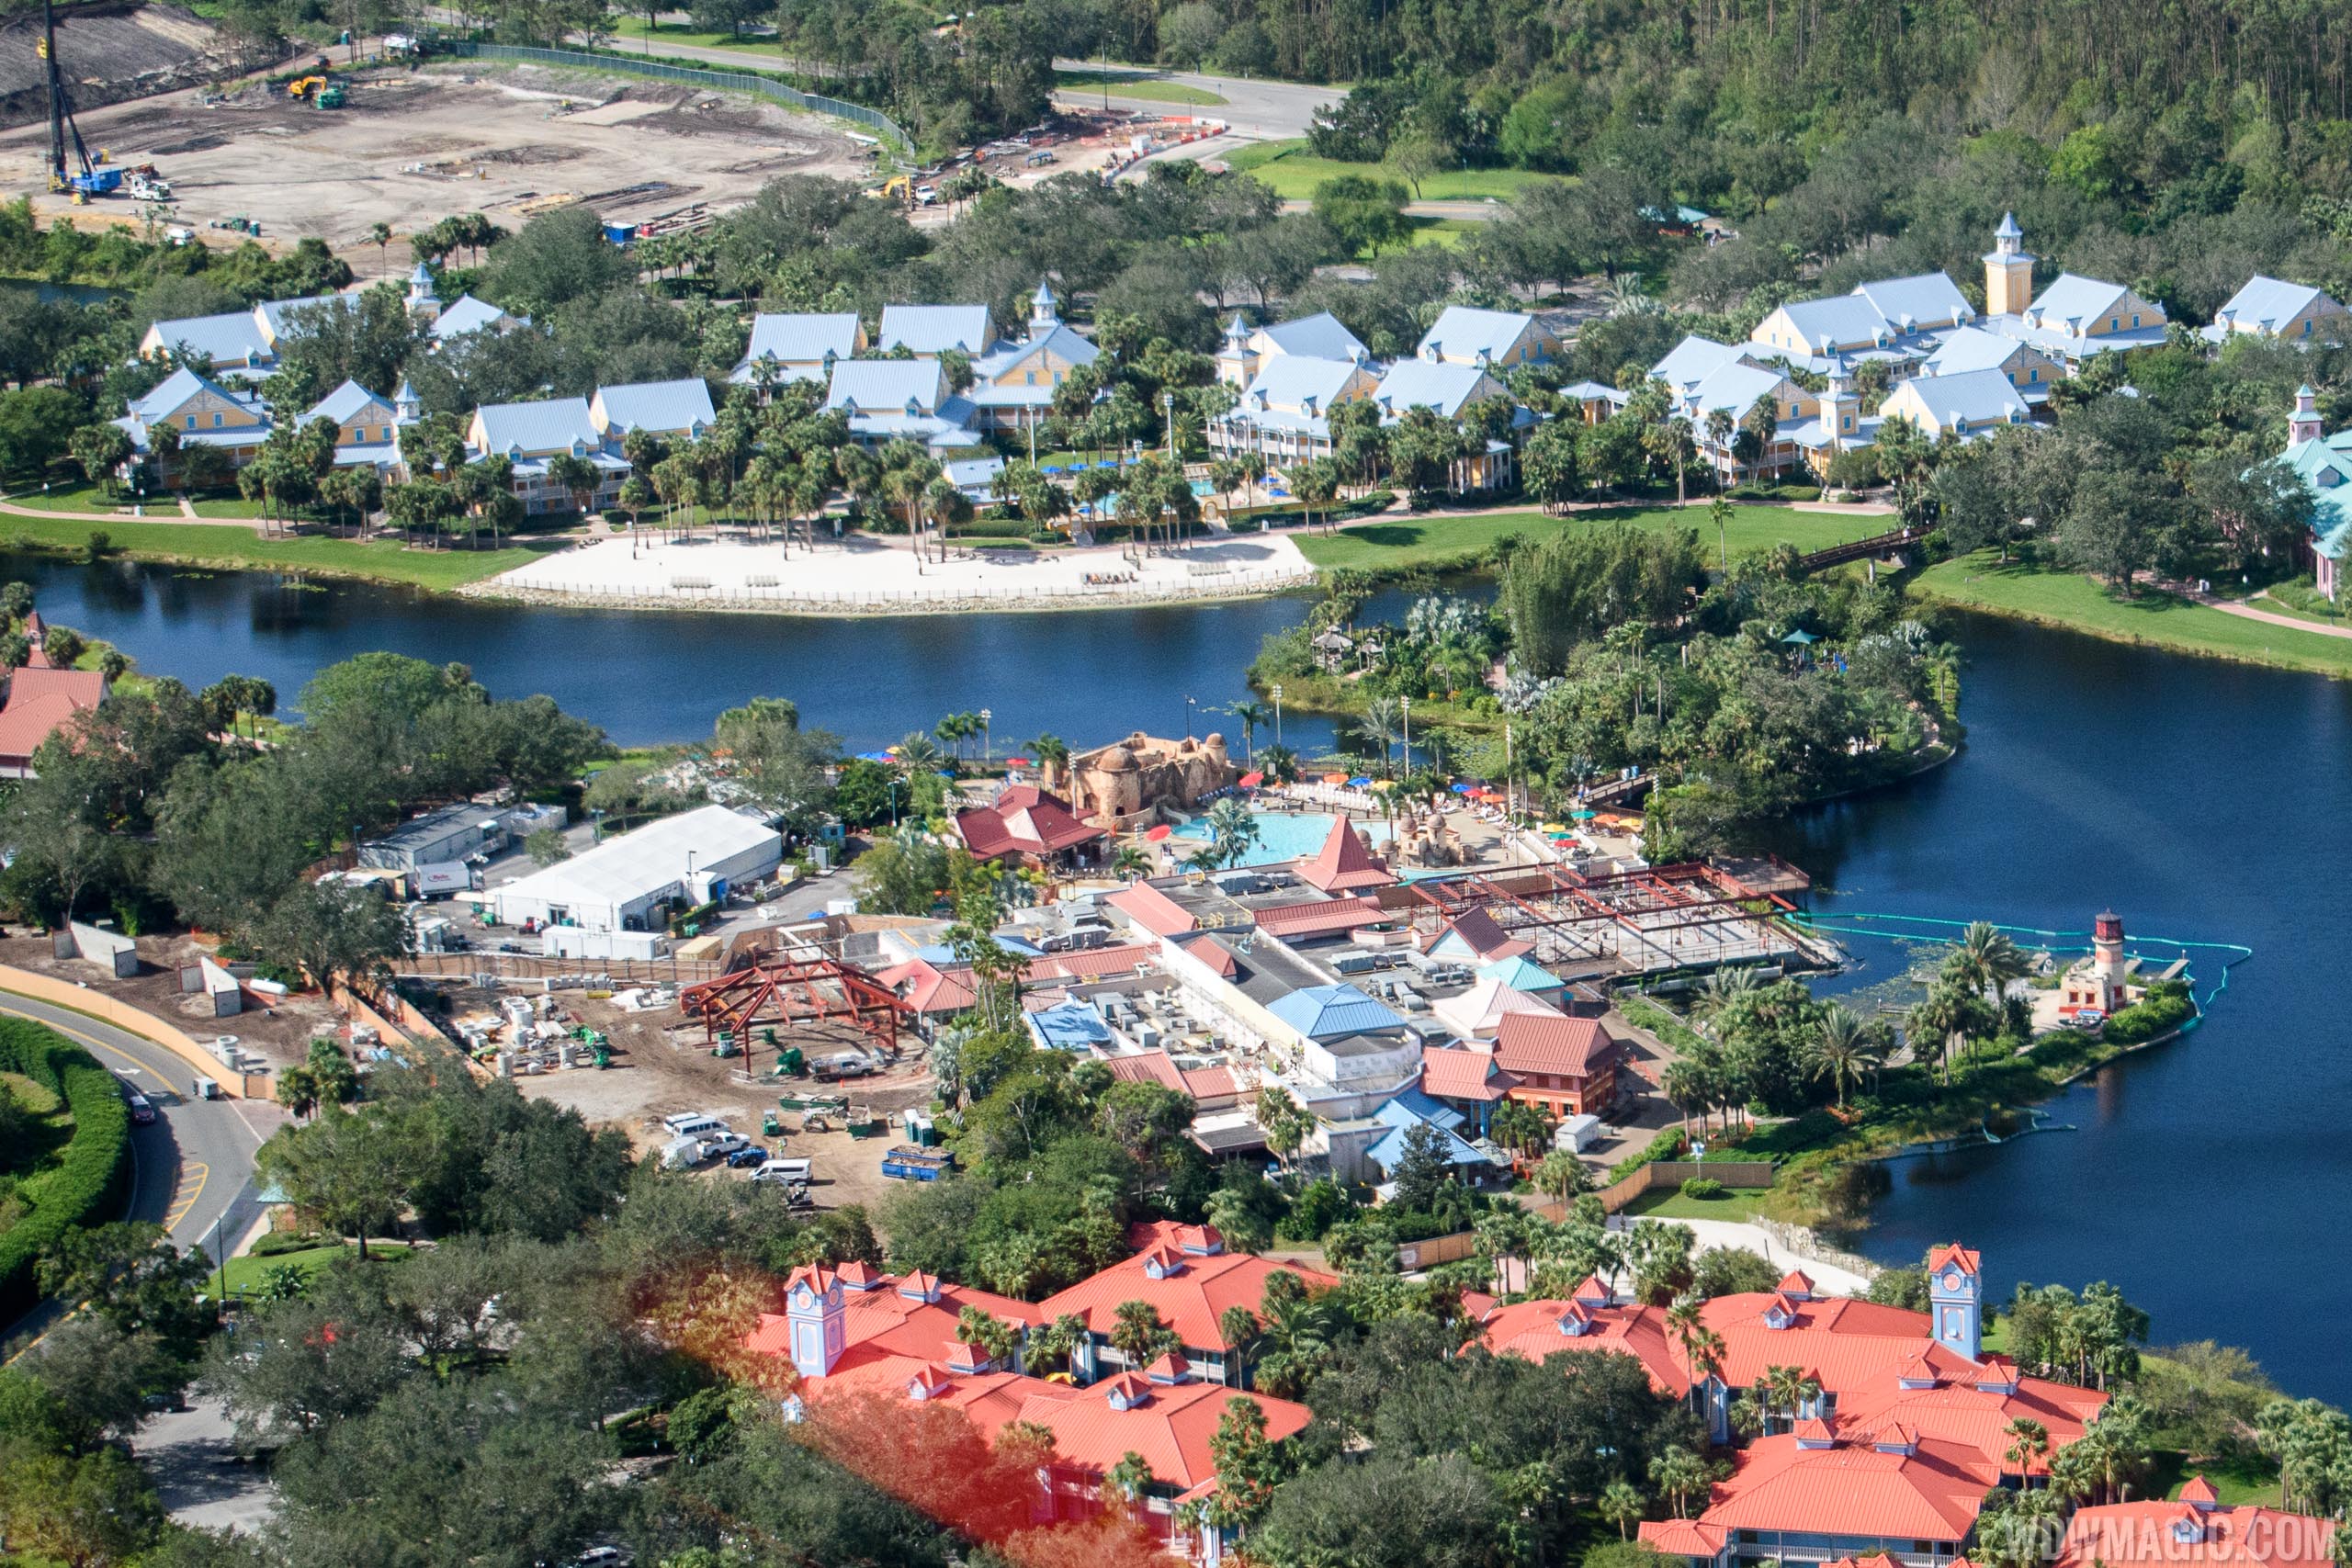 PHOTOS  Significant expansion underway at Disneys 